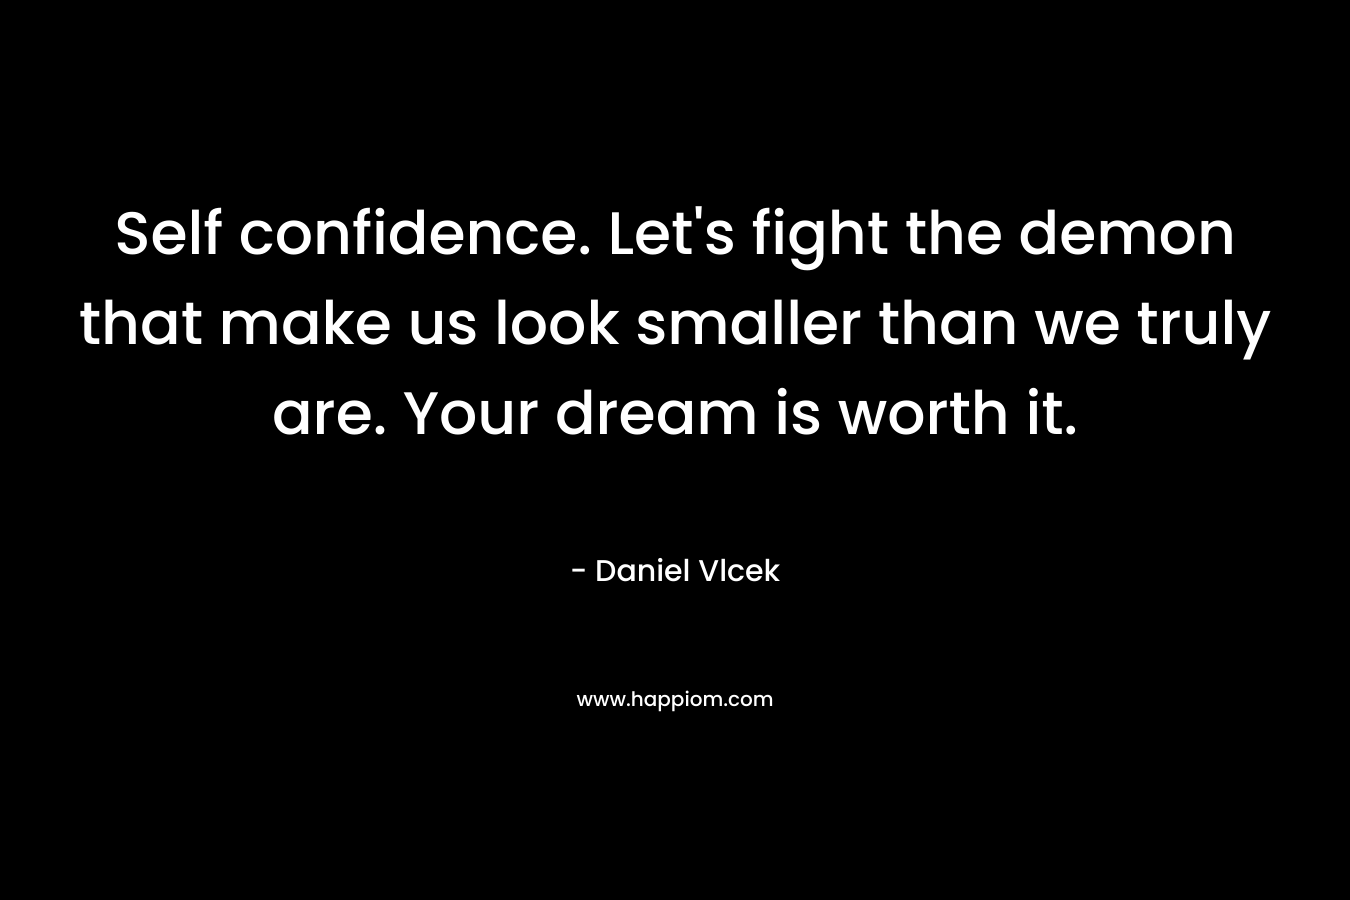 Self confidence. Let’s fight the demon that make us look smaller than we truly are. Your dream is worth it. – Daniel Vlcek